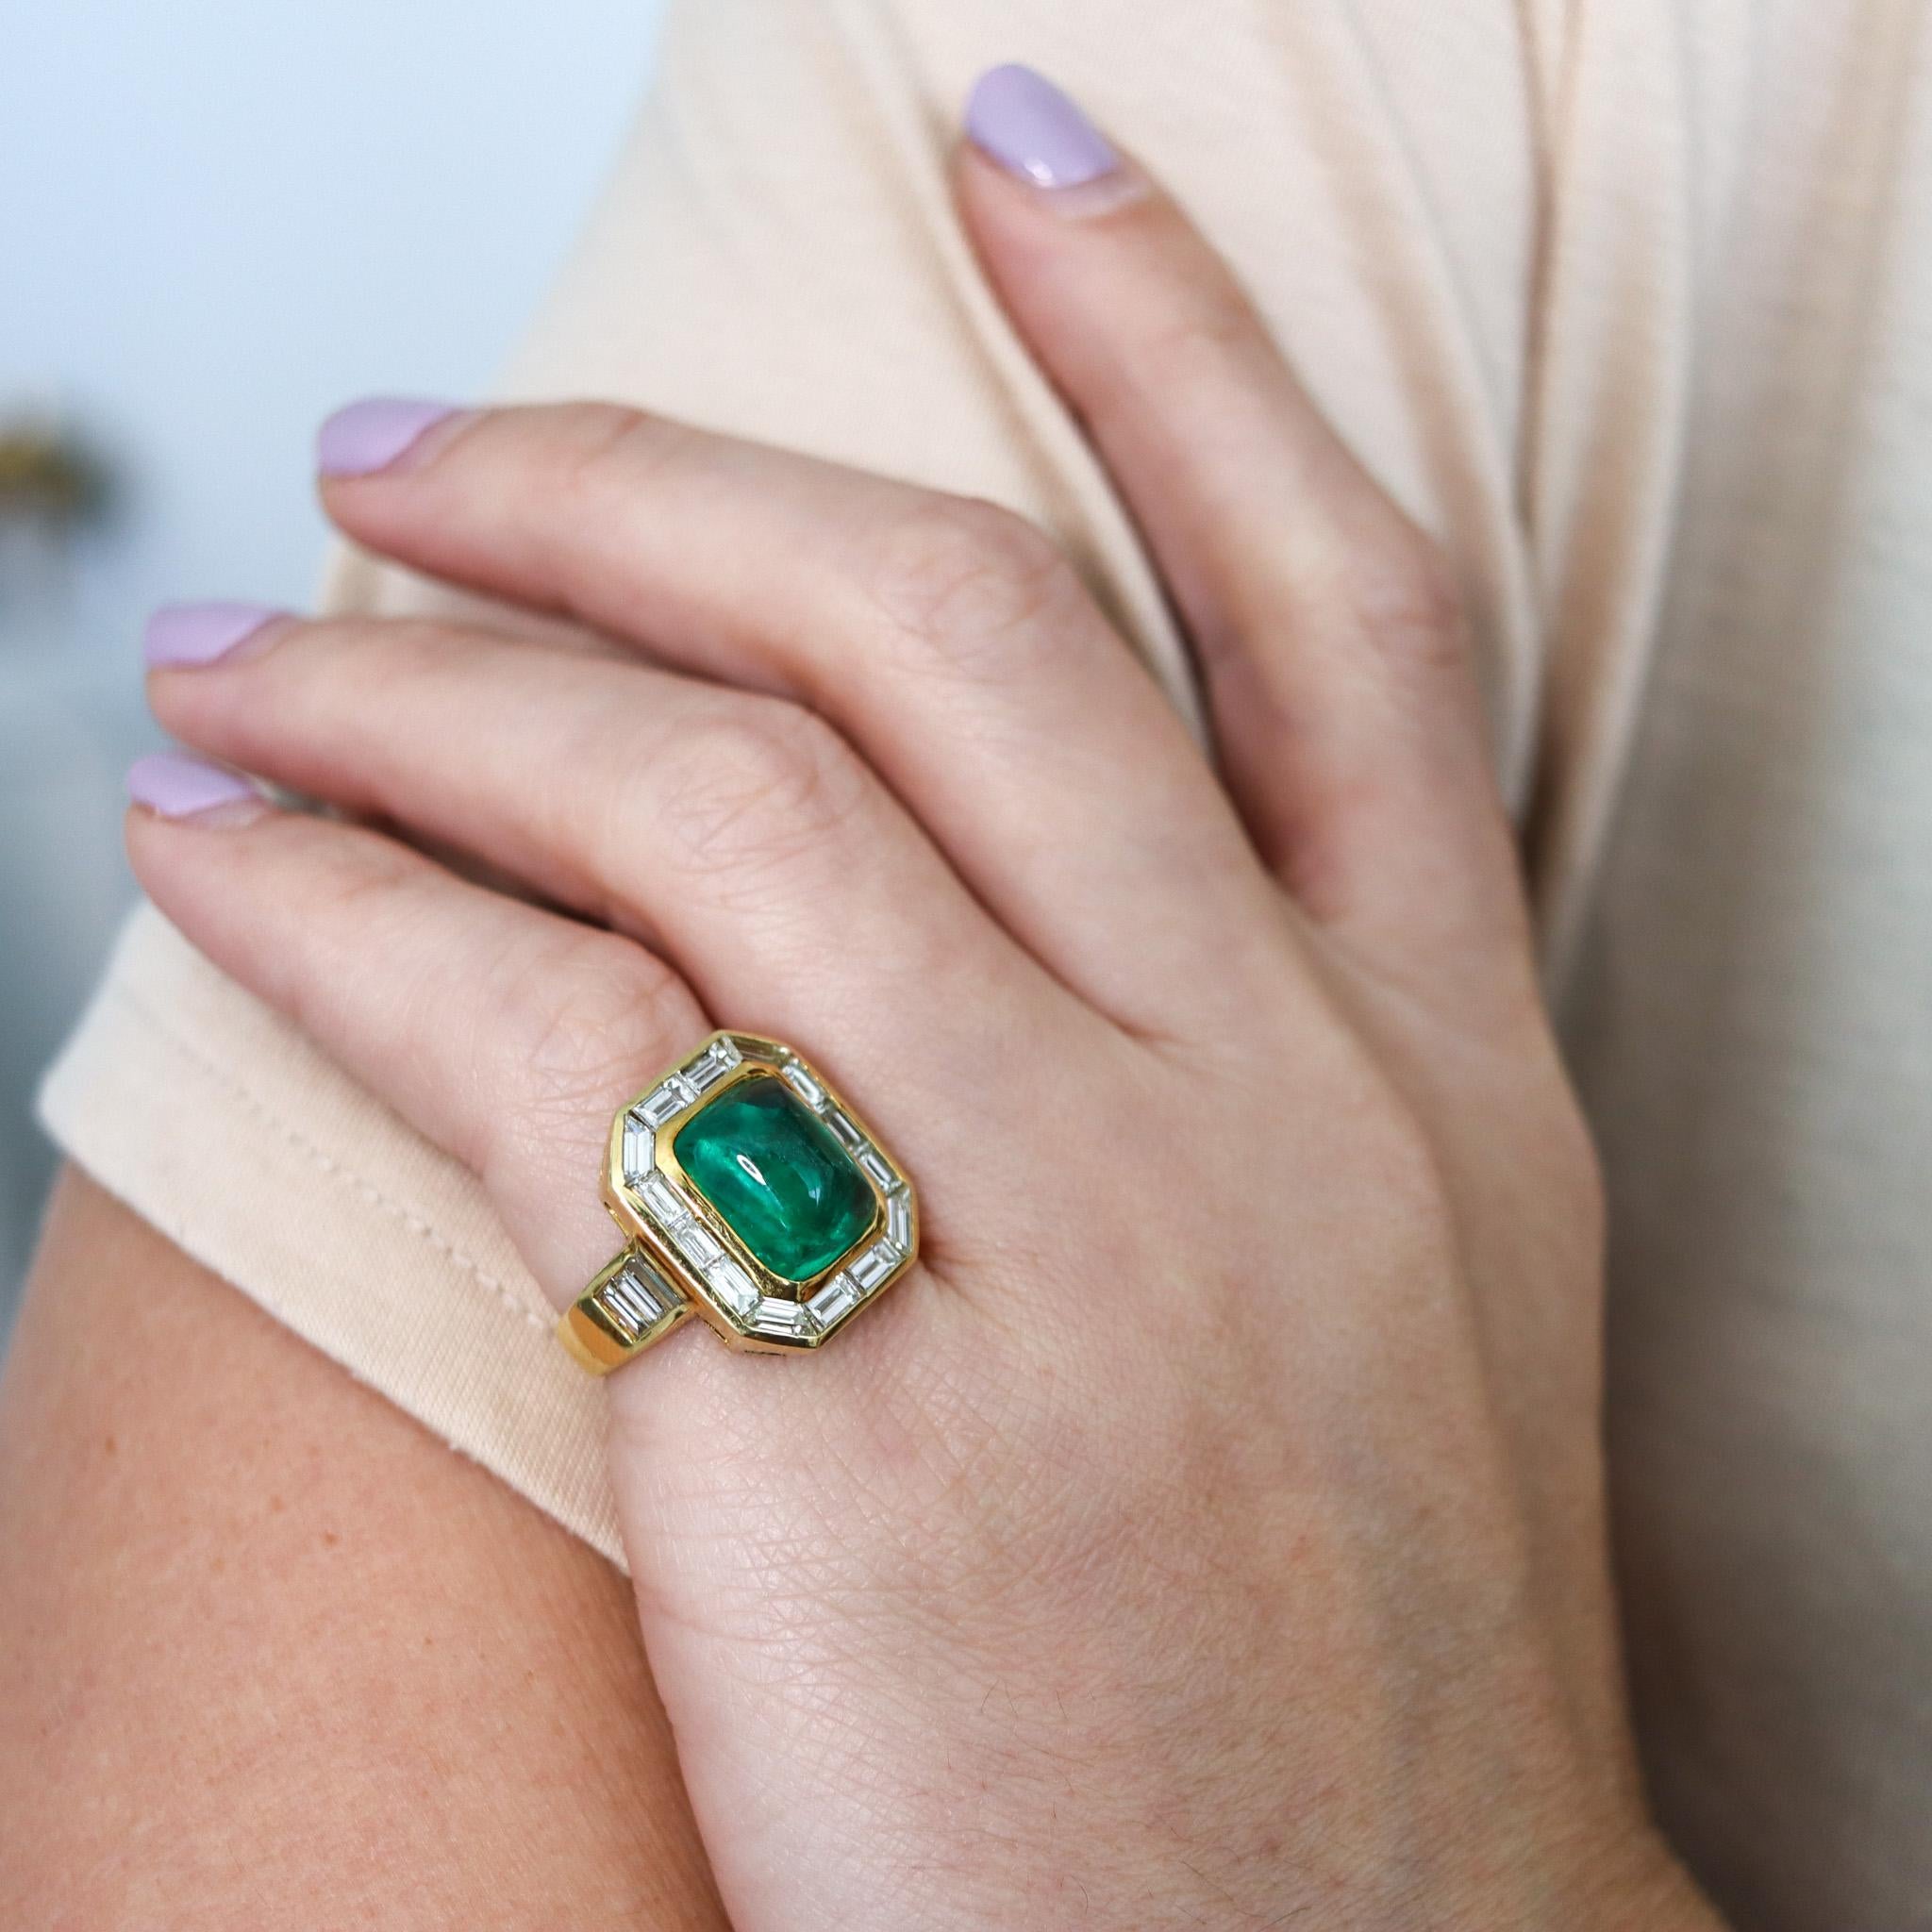 Bvlgari Cocktail Ring In 18Kt Yellow Gold With 9.04 Ctw In Diamonds And Emerald 4